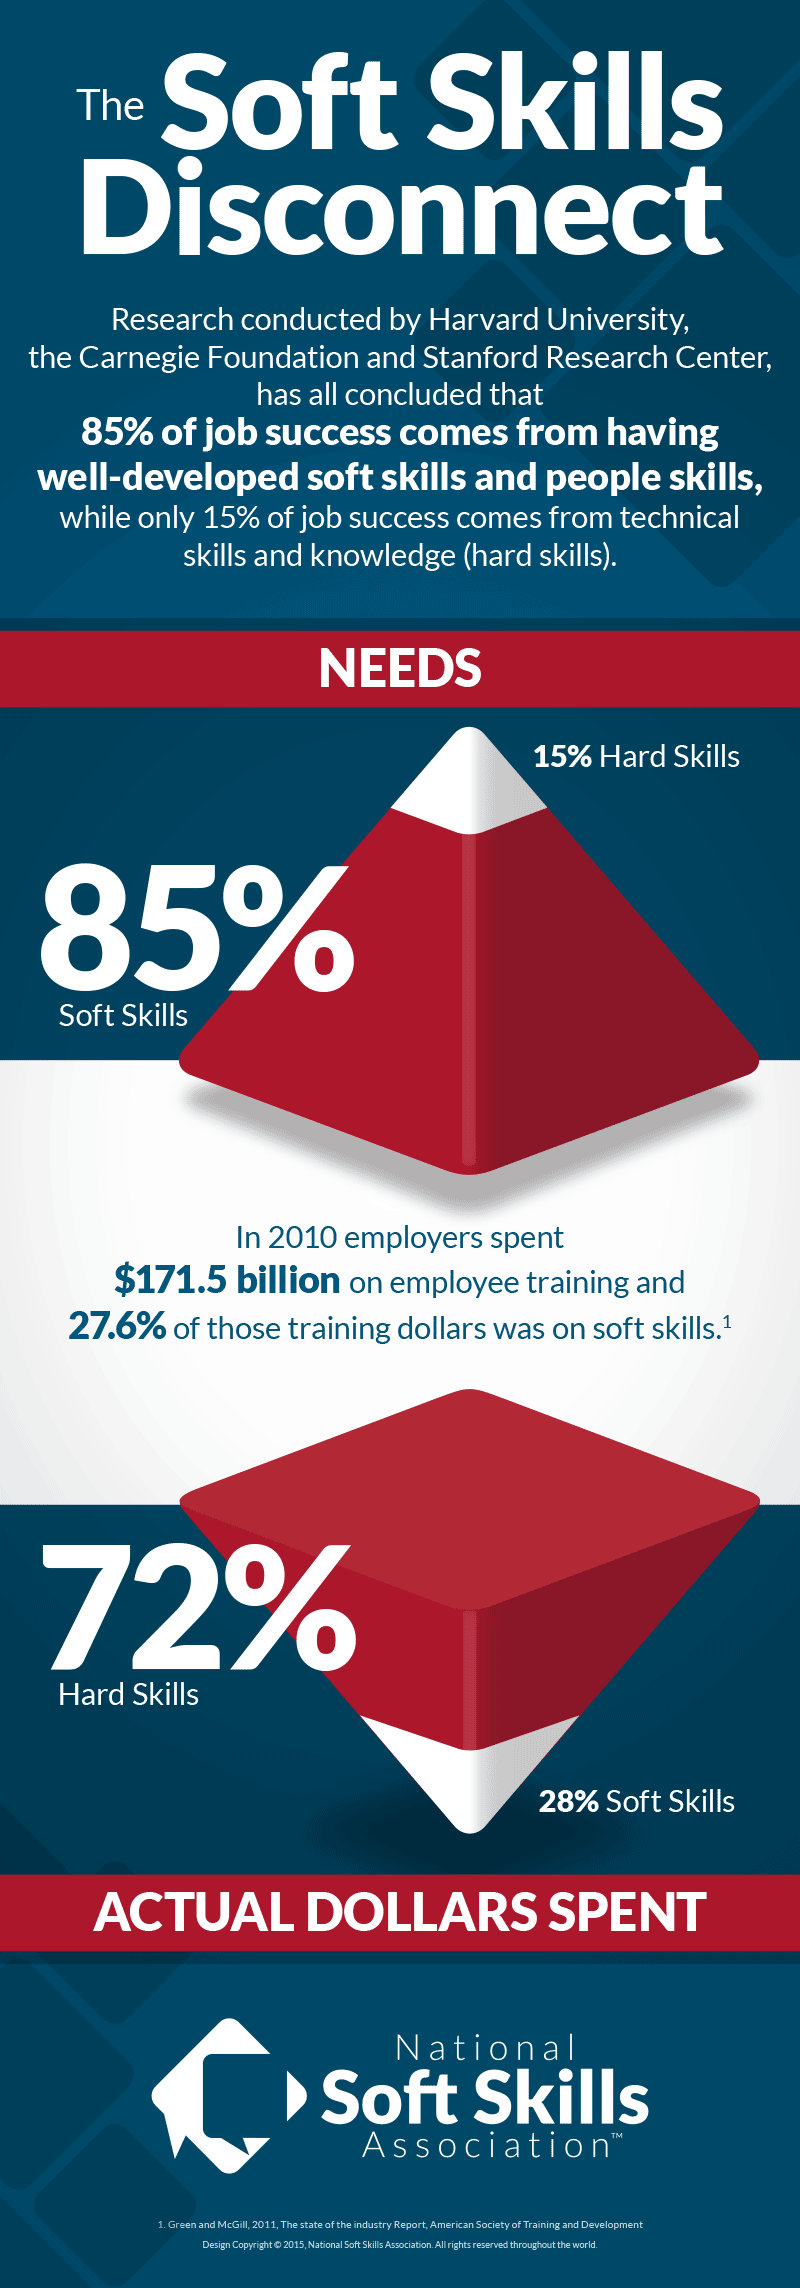 social-skills-disconnect-infographic